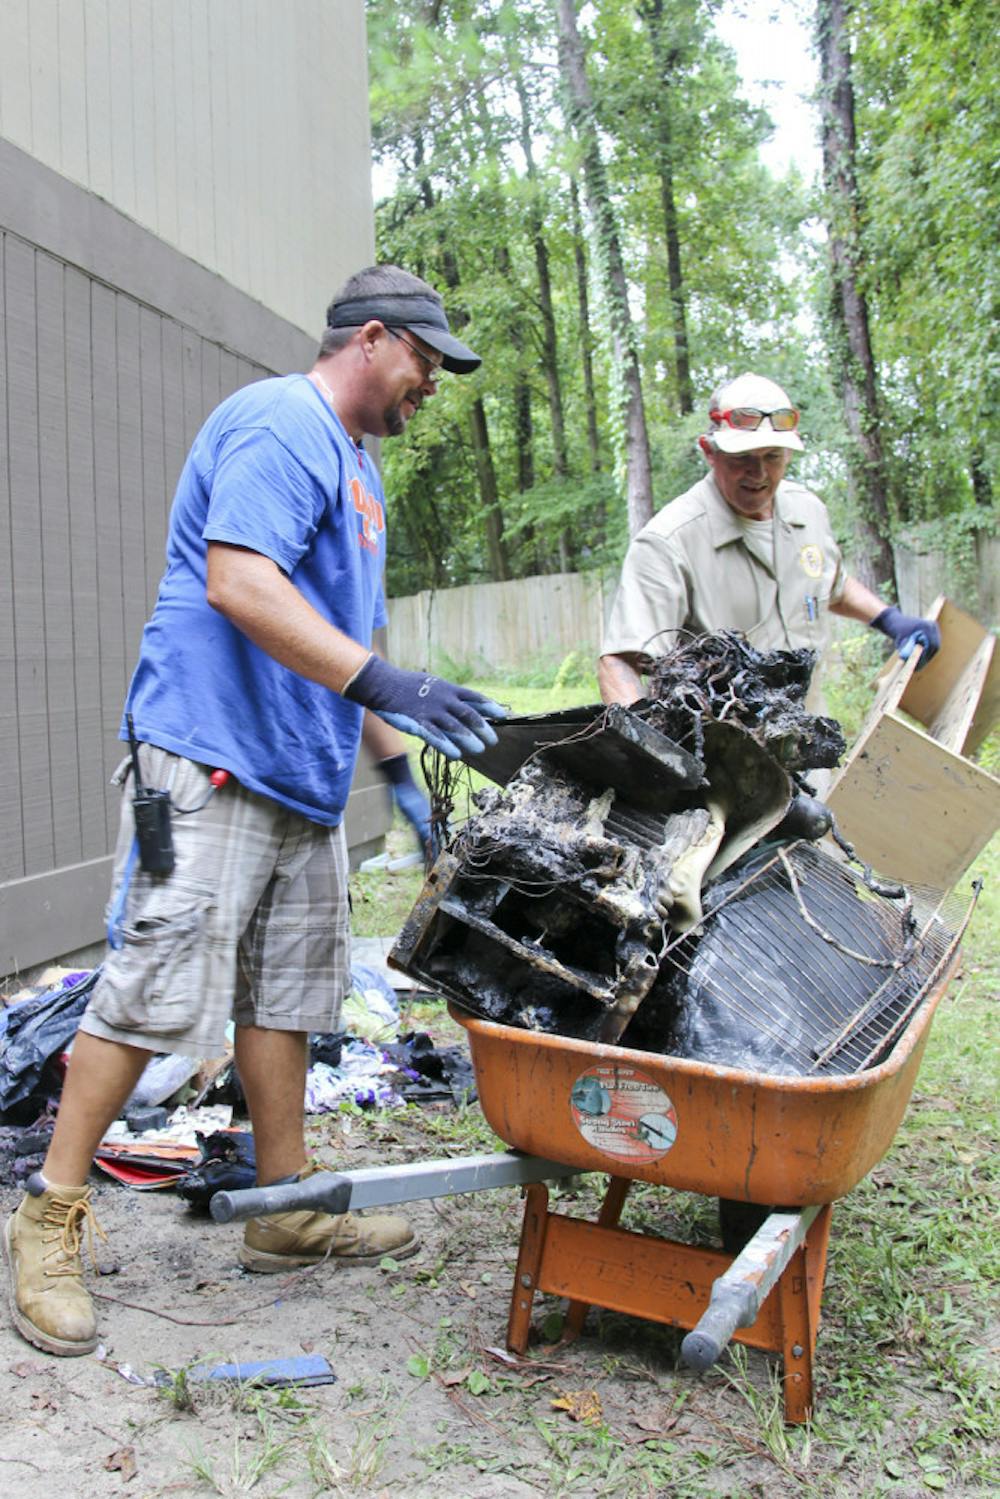 <p class="p1"><span class="s1">The Aspen Companies’ workers Jeremy Dees, left, and Greg Dove, right, clean up damage from a fire at Majestic Oaks Apartments on Tuesday afternoon.</span></p>